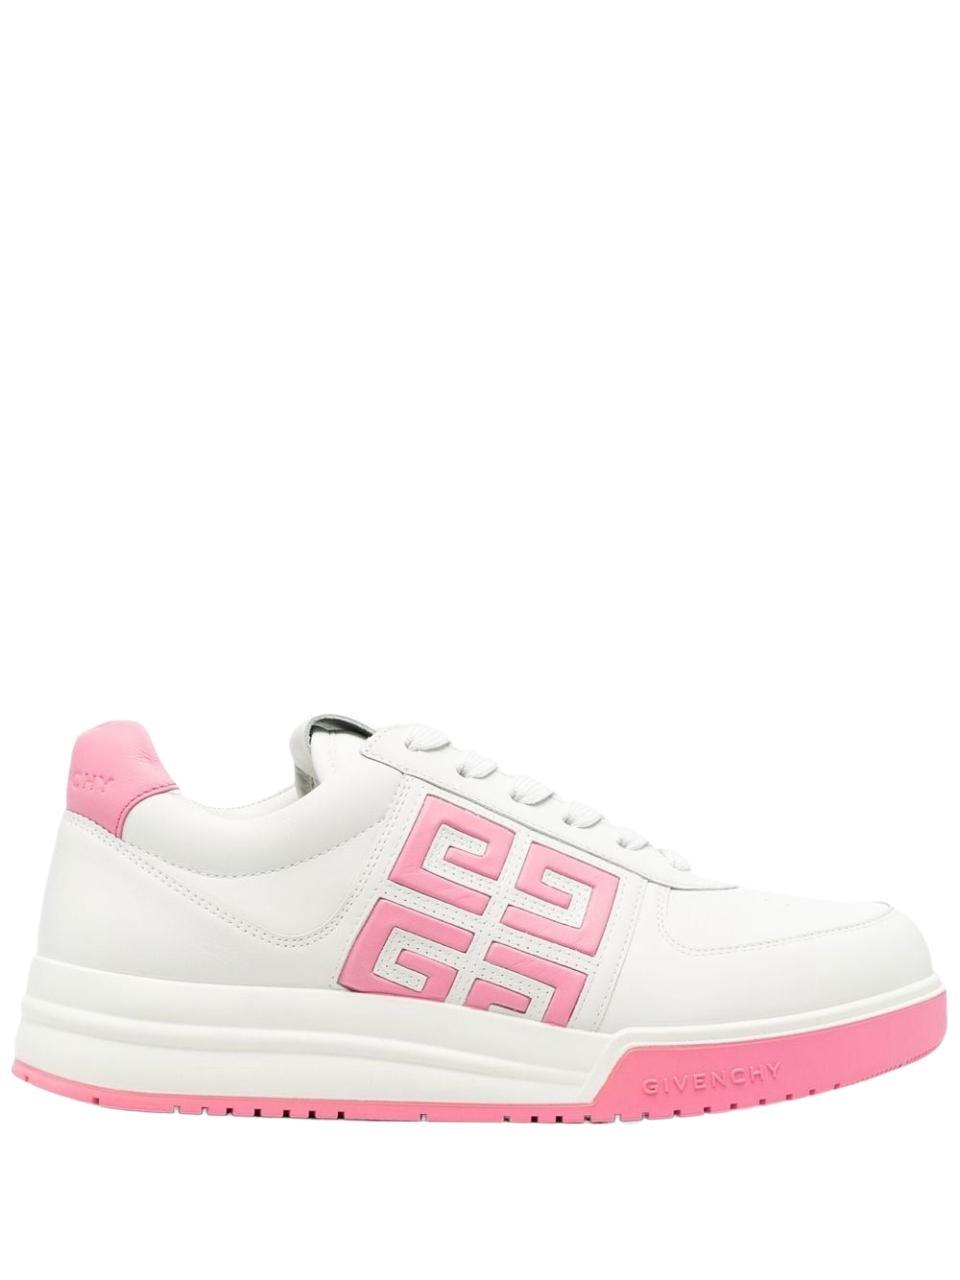 Givenchy G4 Lace-up Sneakers in Pink | Lyst